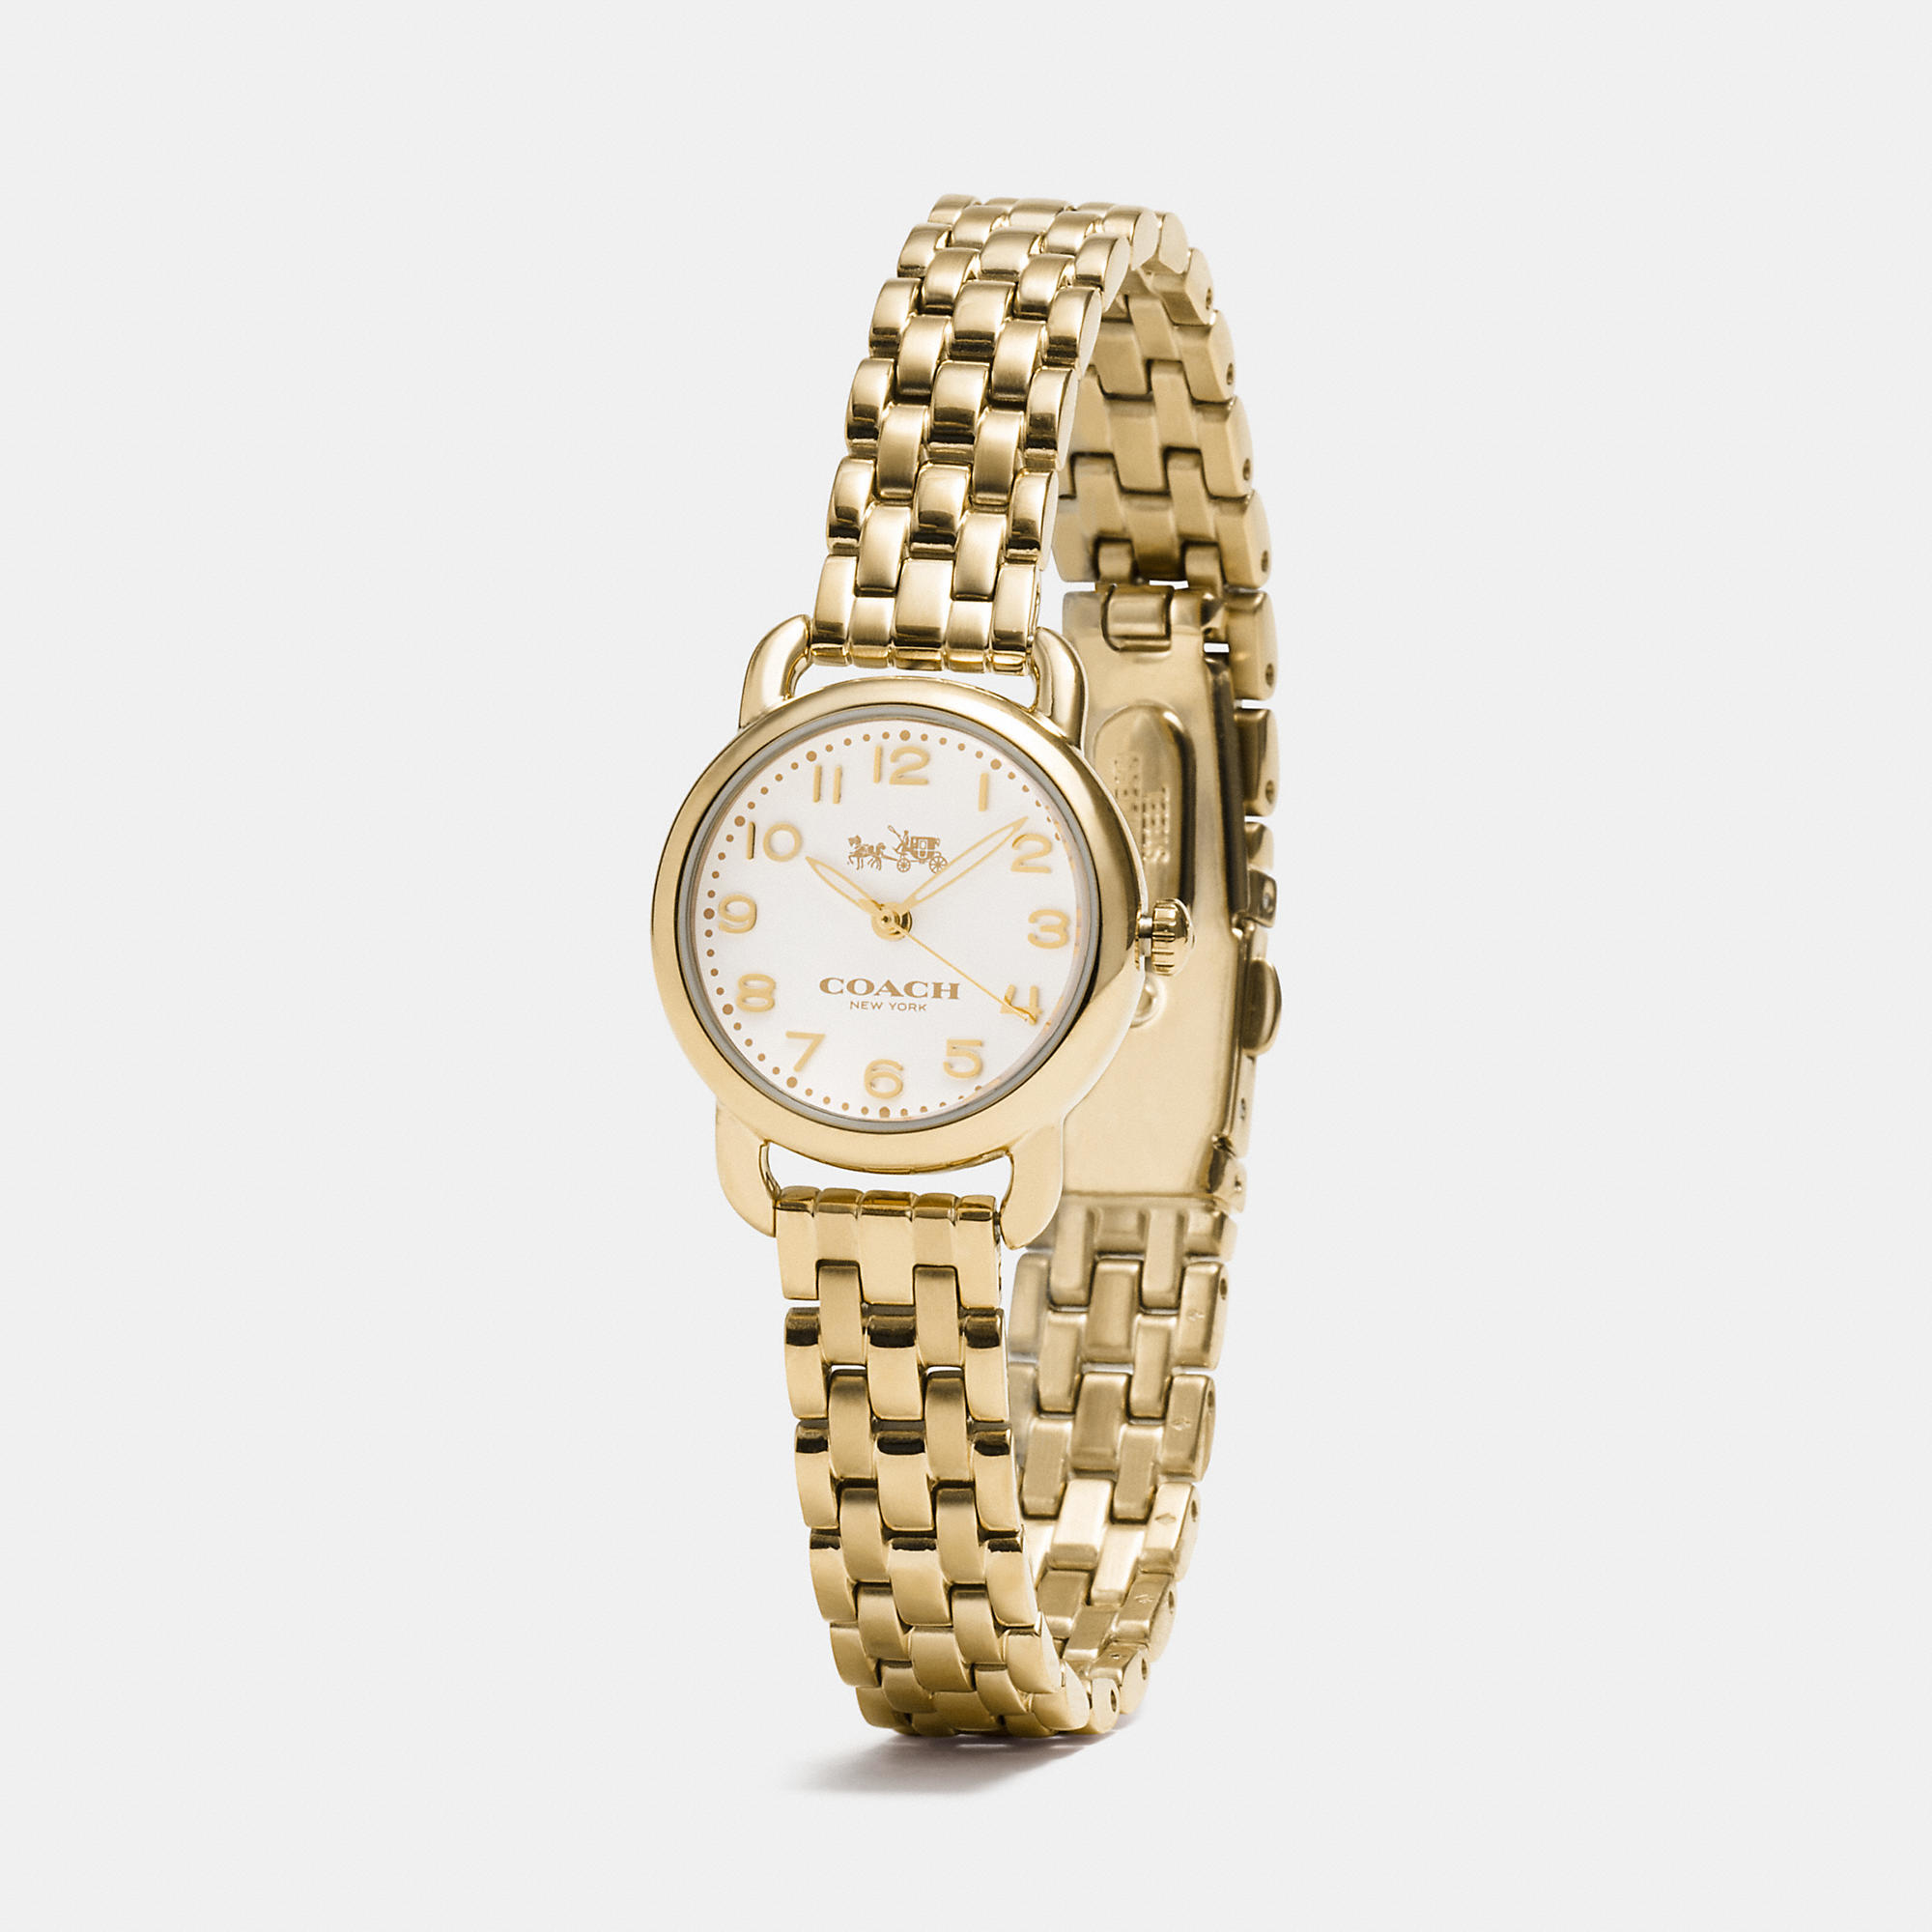 Lyst - Coach Delancey 23mm Small Gold Plated Bracelet Watch in Metallic